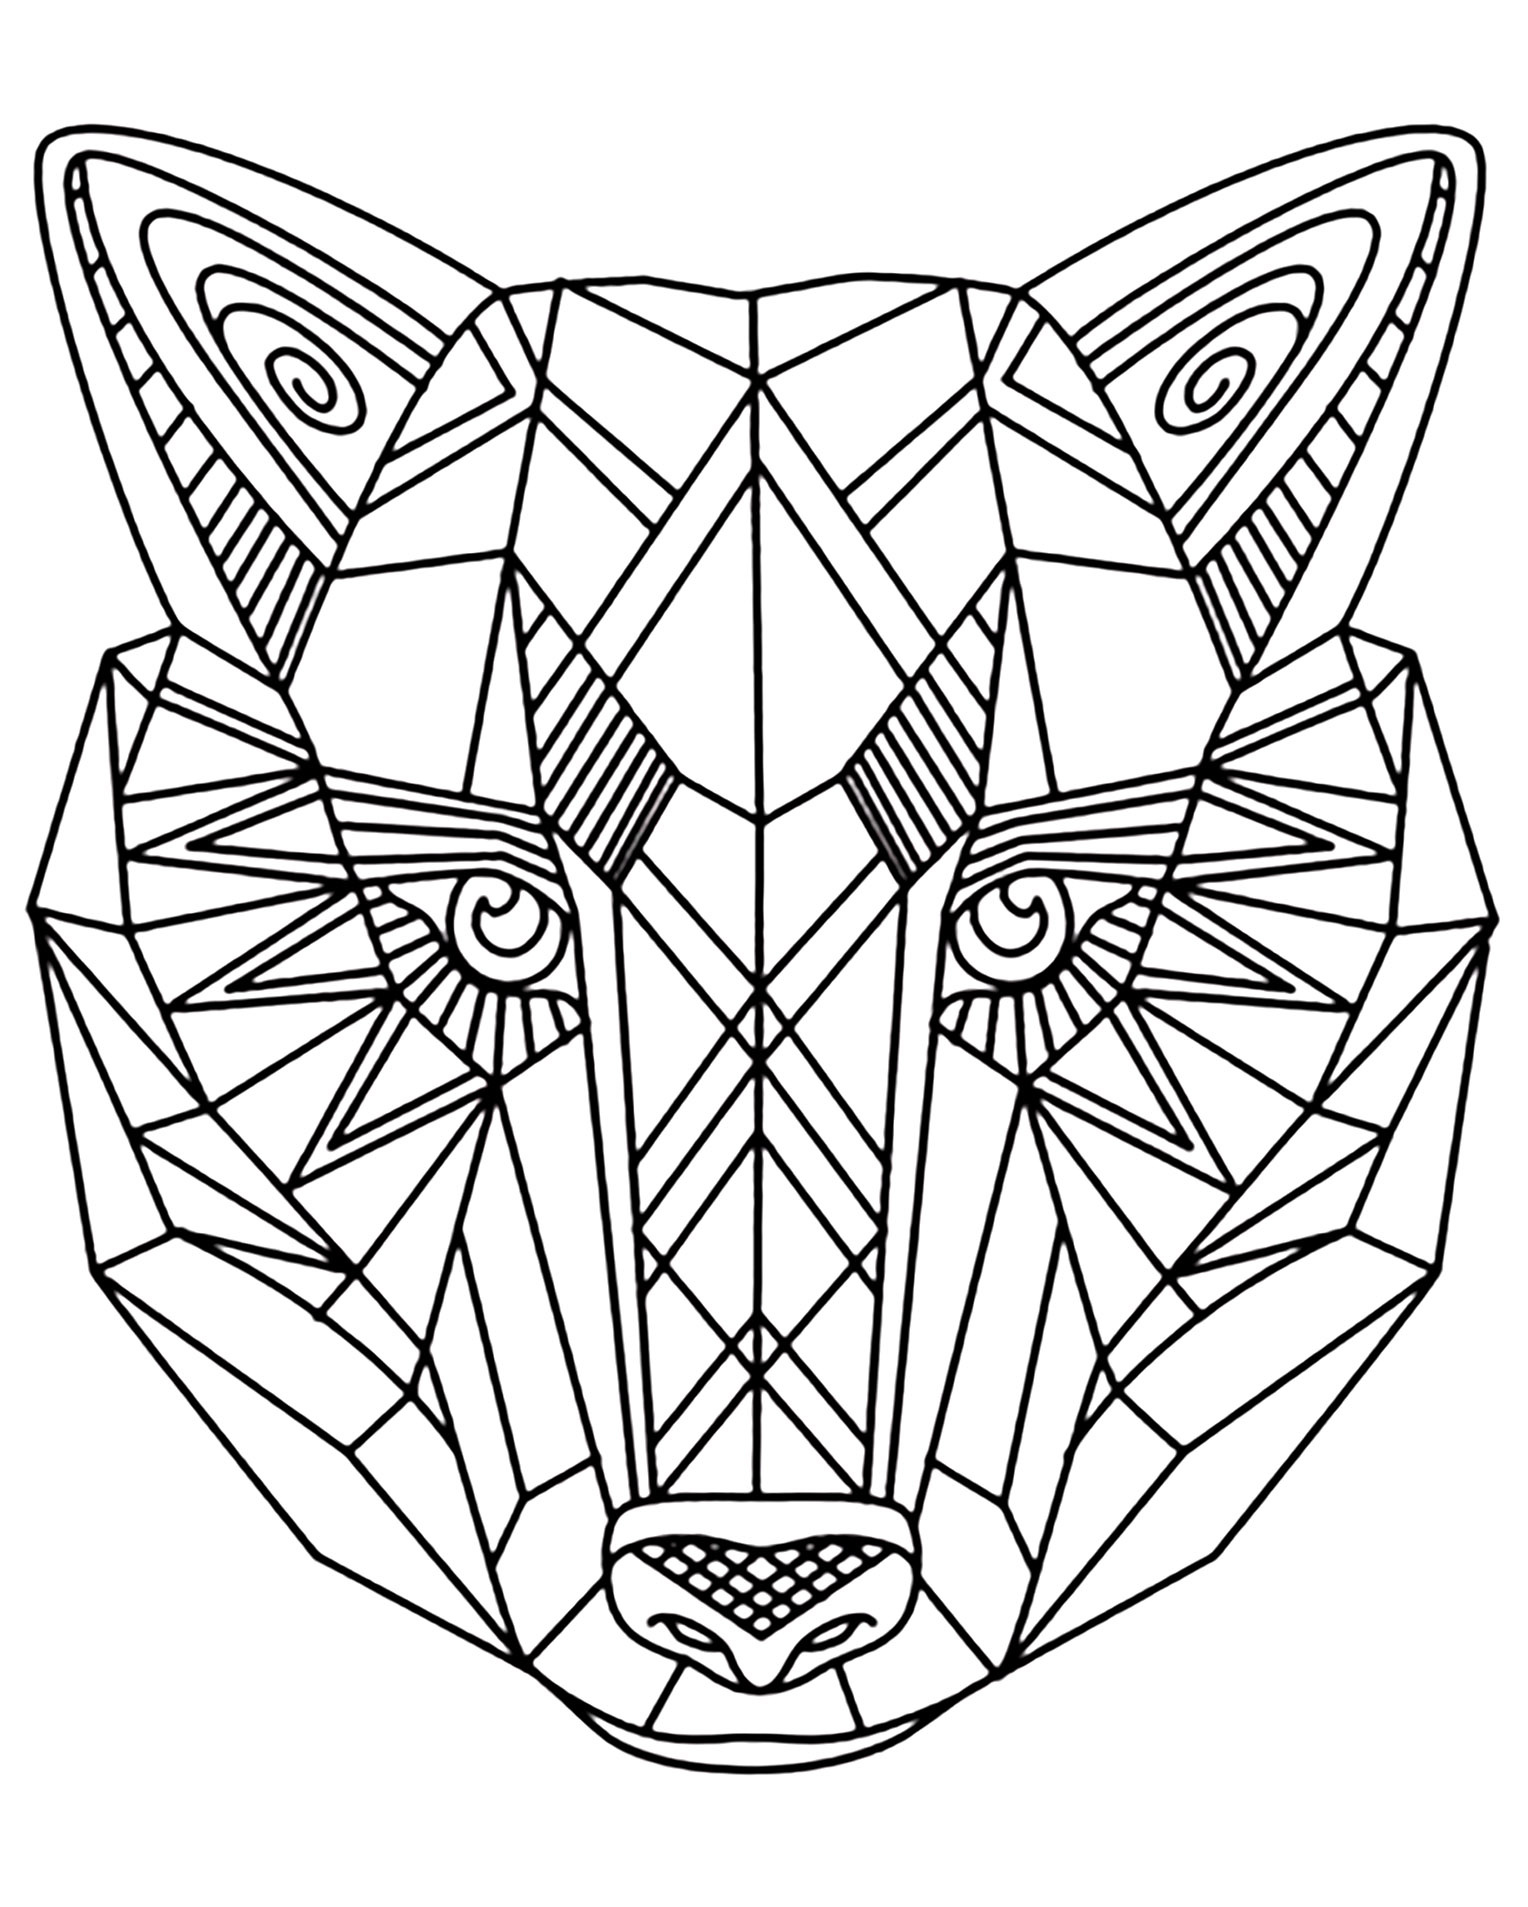 2 image=animals coloring page wolf 1 1